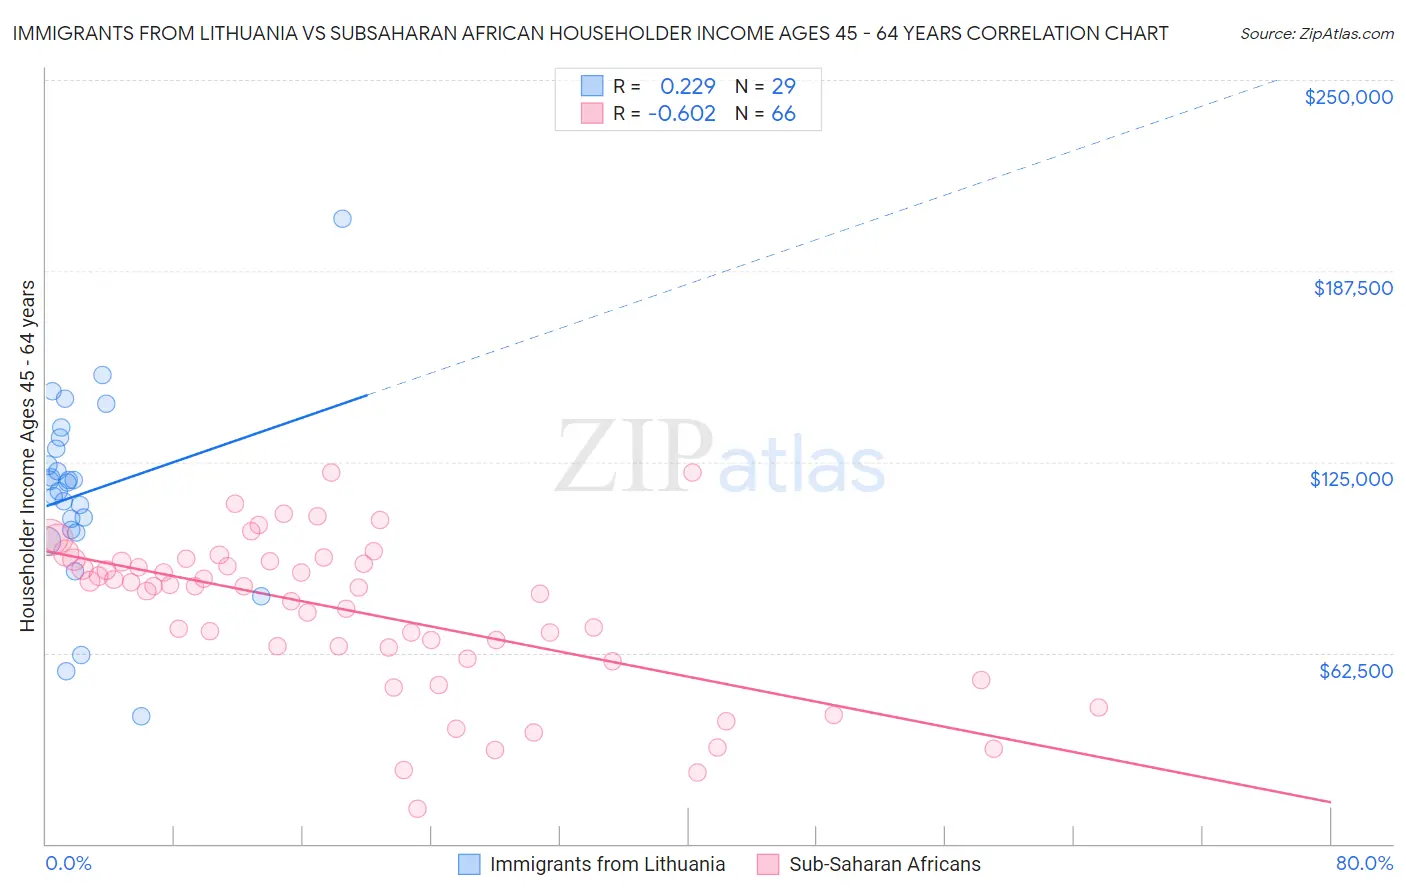 Immigrants from Lithuania vs Subsaharan African Householder Income Ages 45 - 64 years